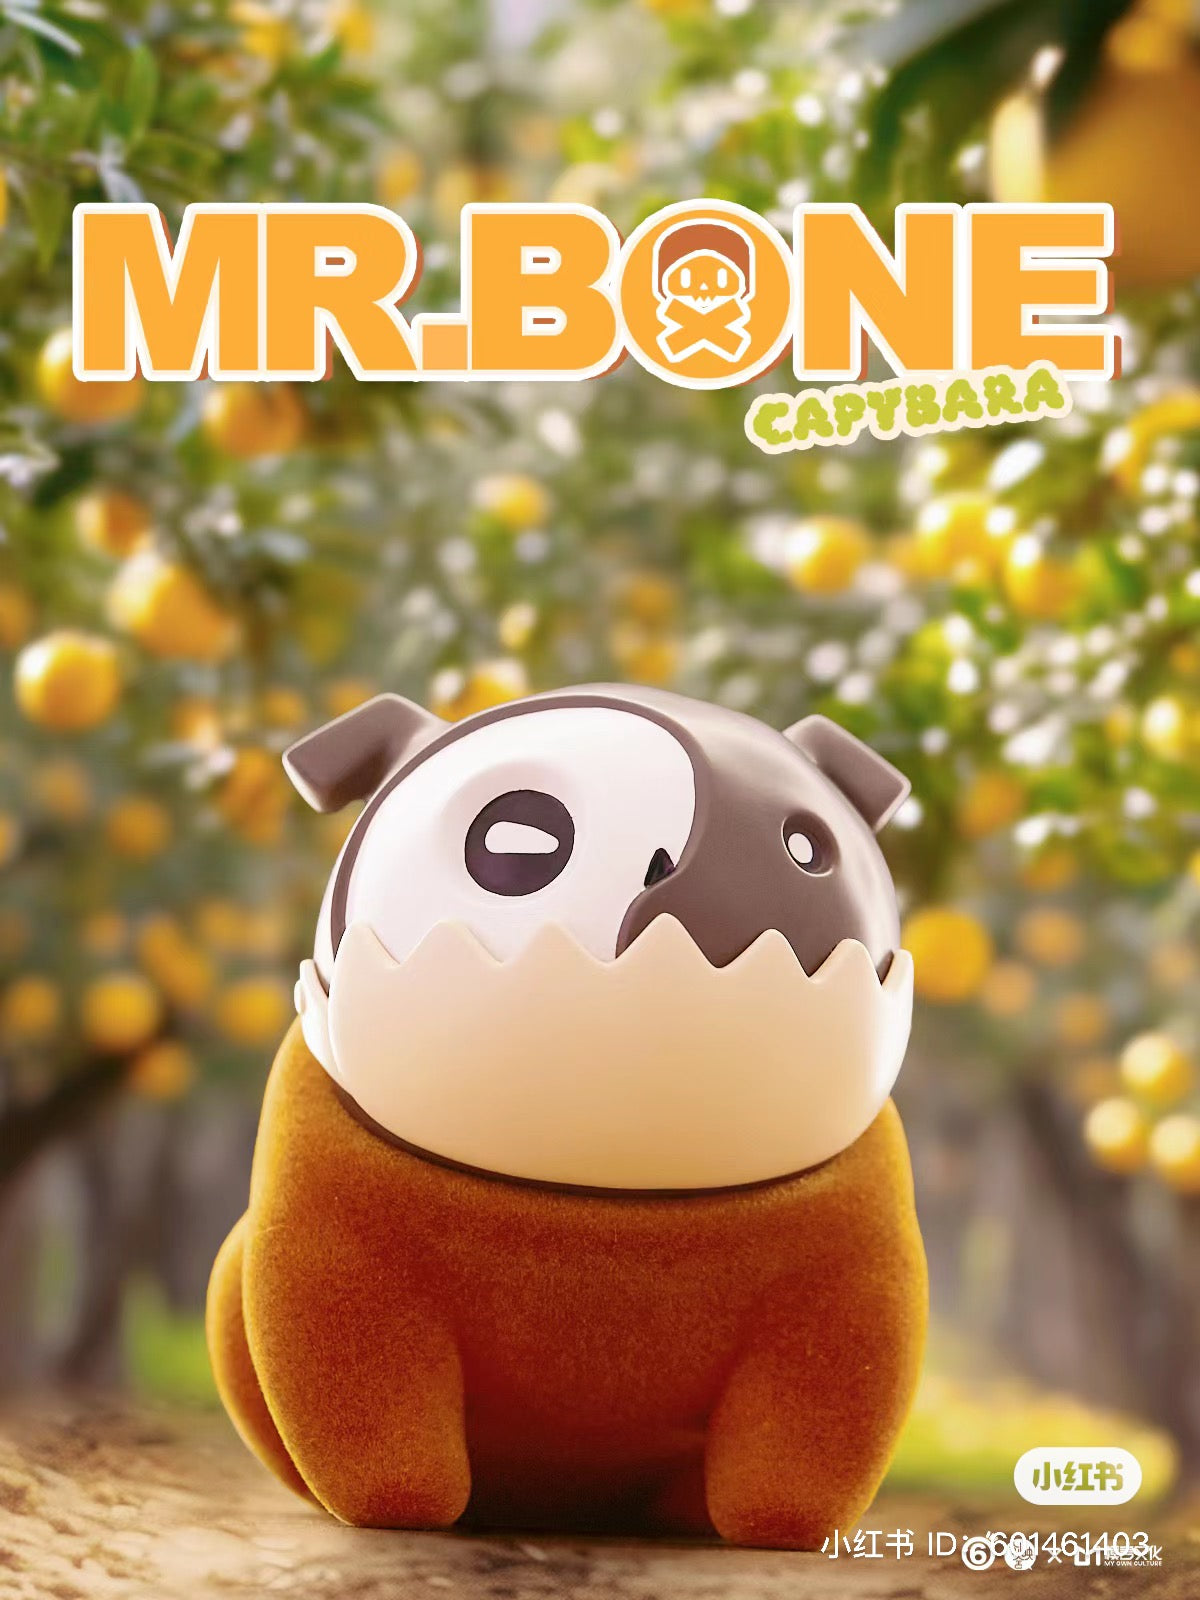 A blind box preorder for Mr. Bone Capybaras toy, featuring a cartoon animal figure in PVC/ABS material, about 12CM high. From Strangecat Toys.